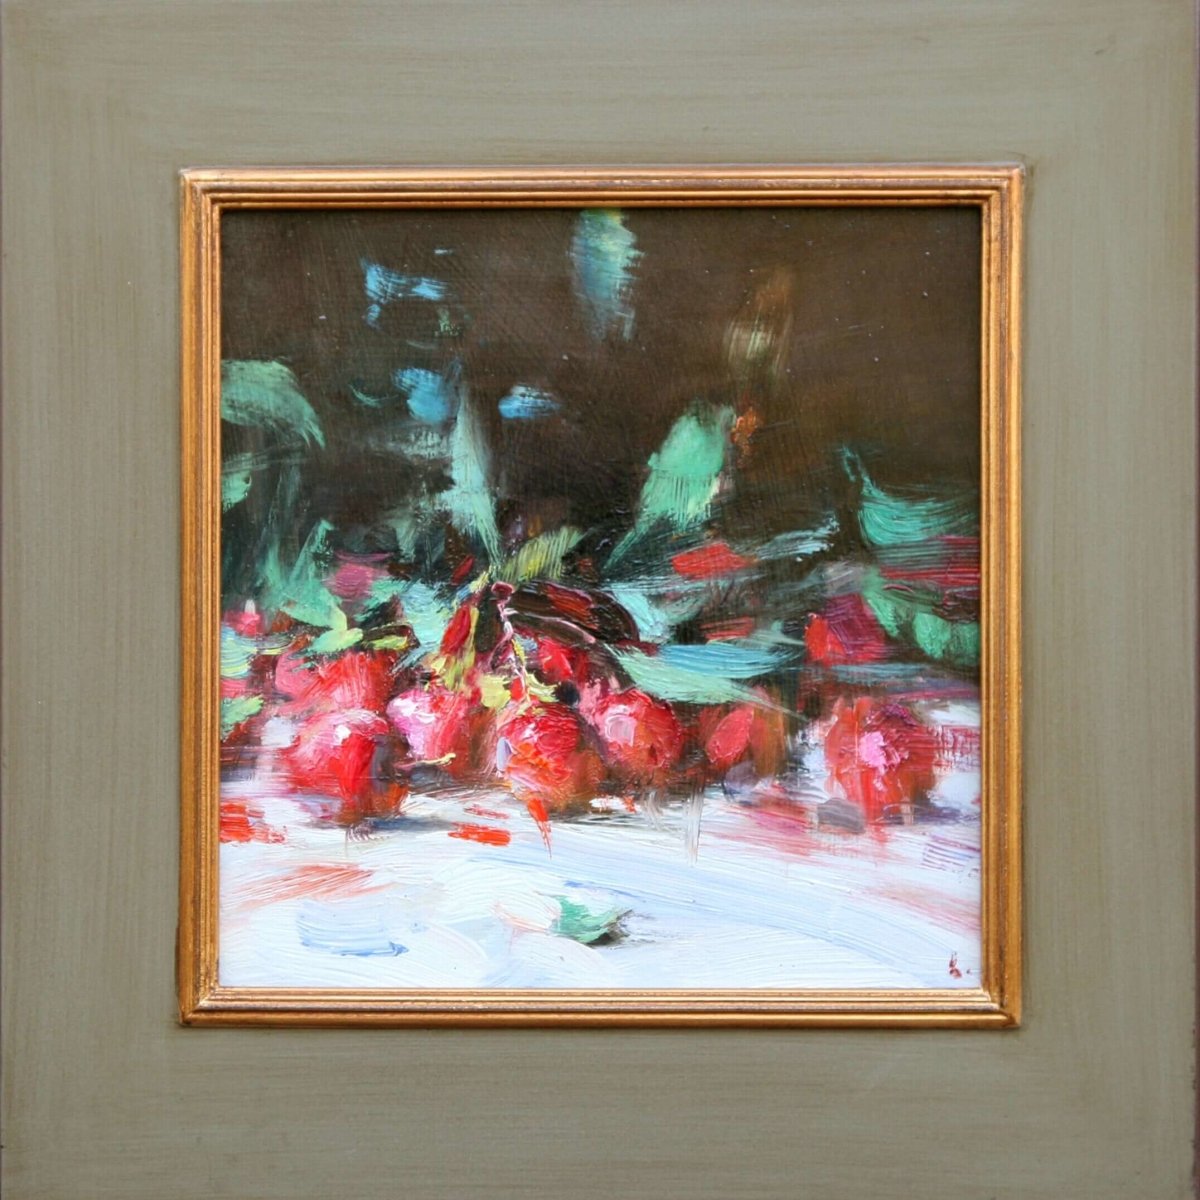 Crab Apples by Ning Lee at LePrince Galleries